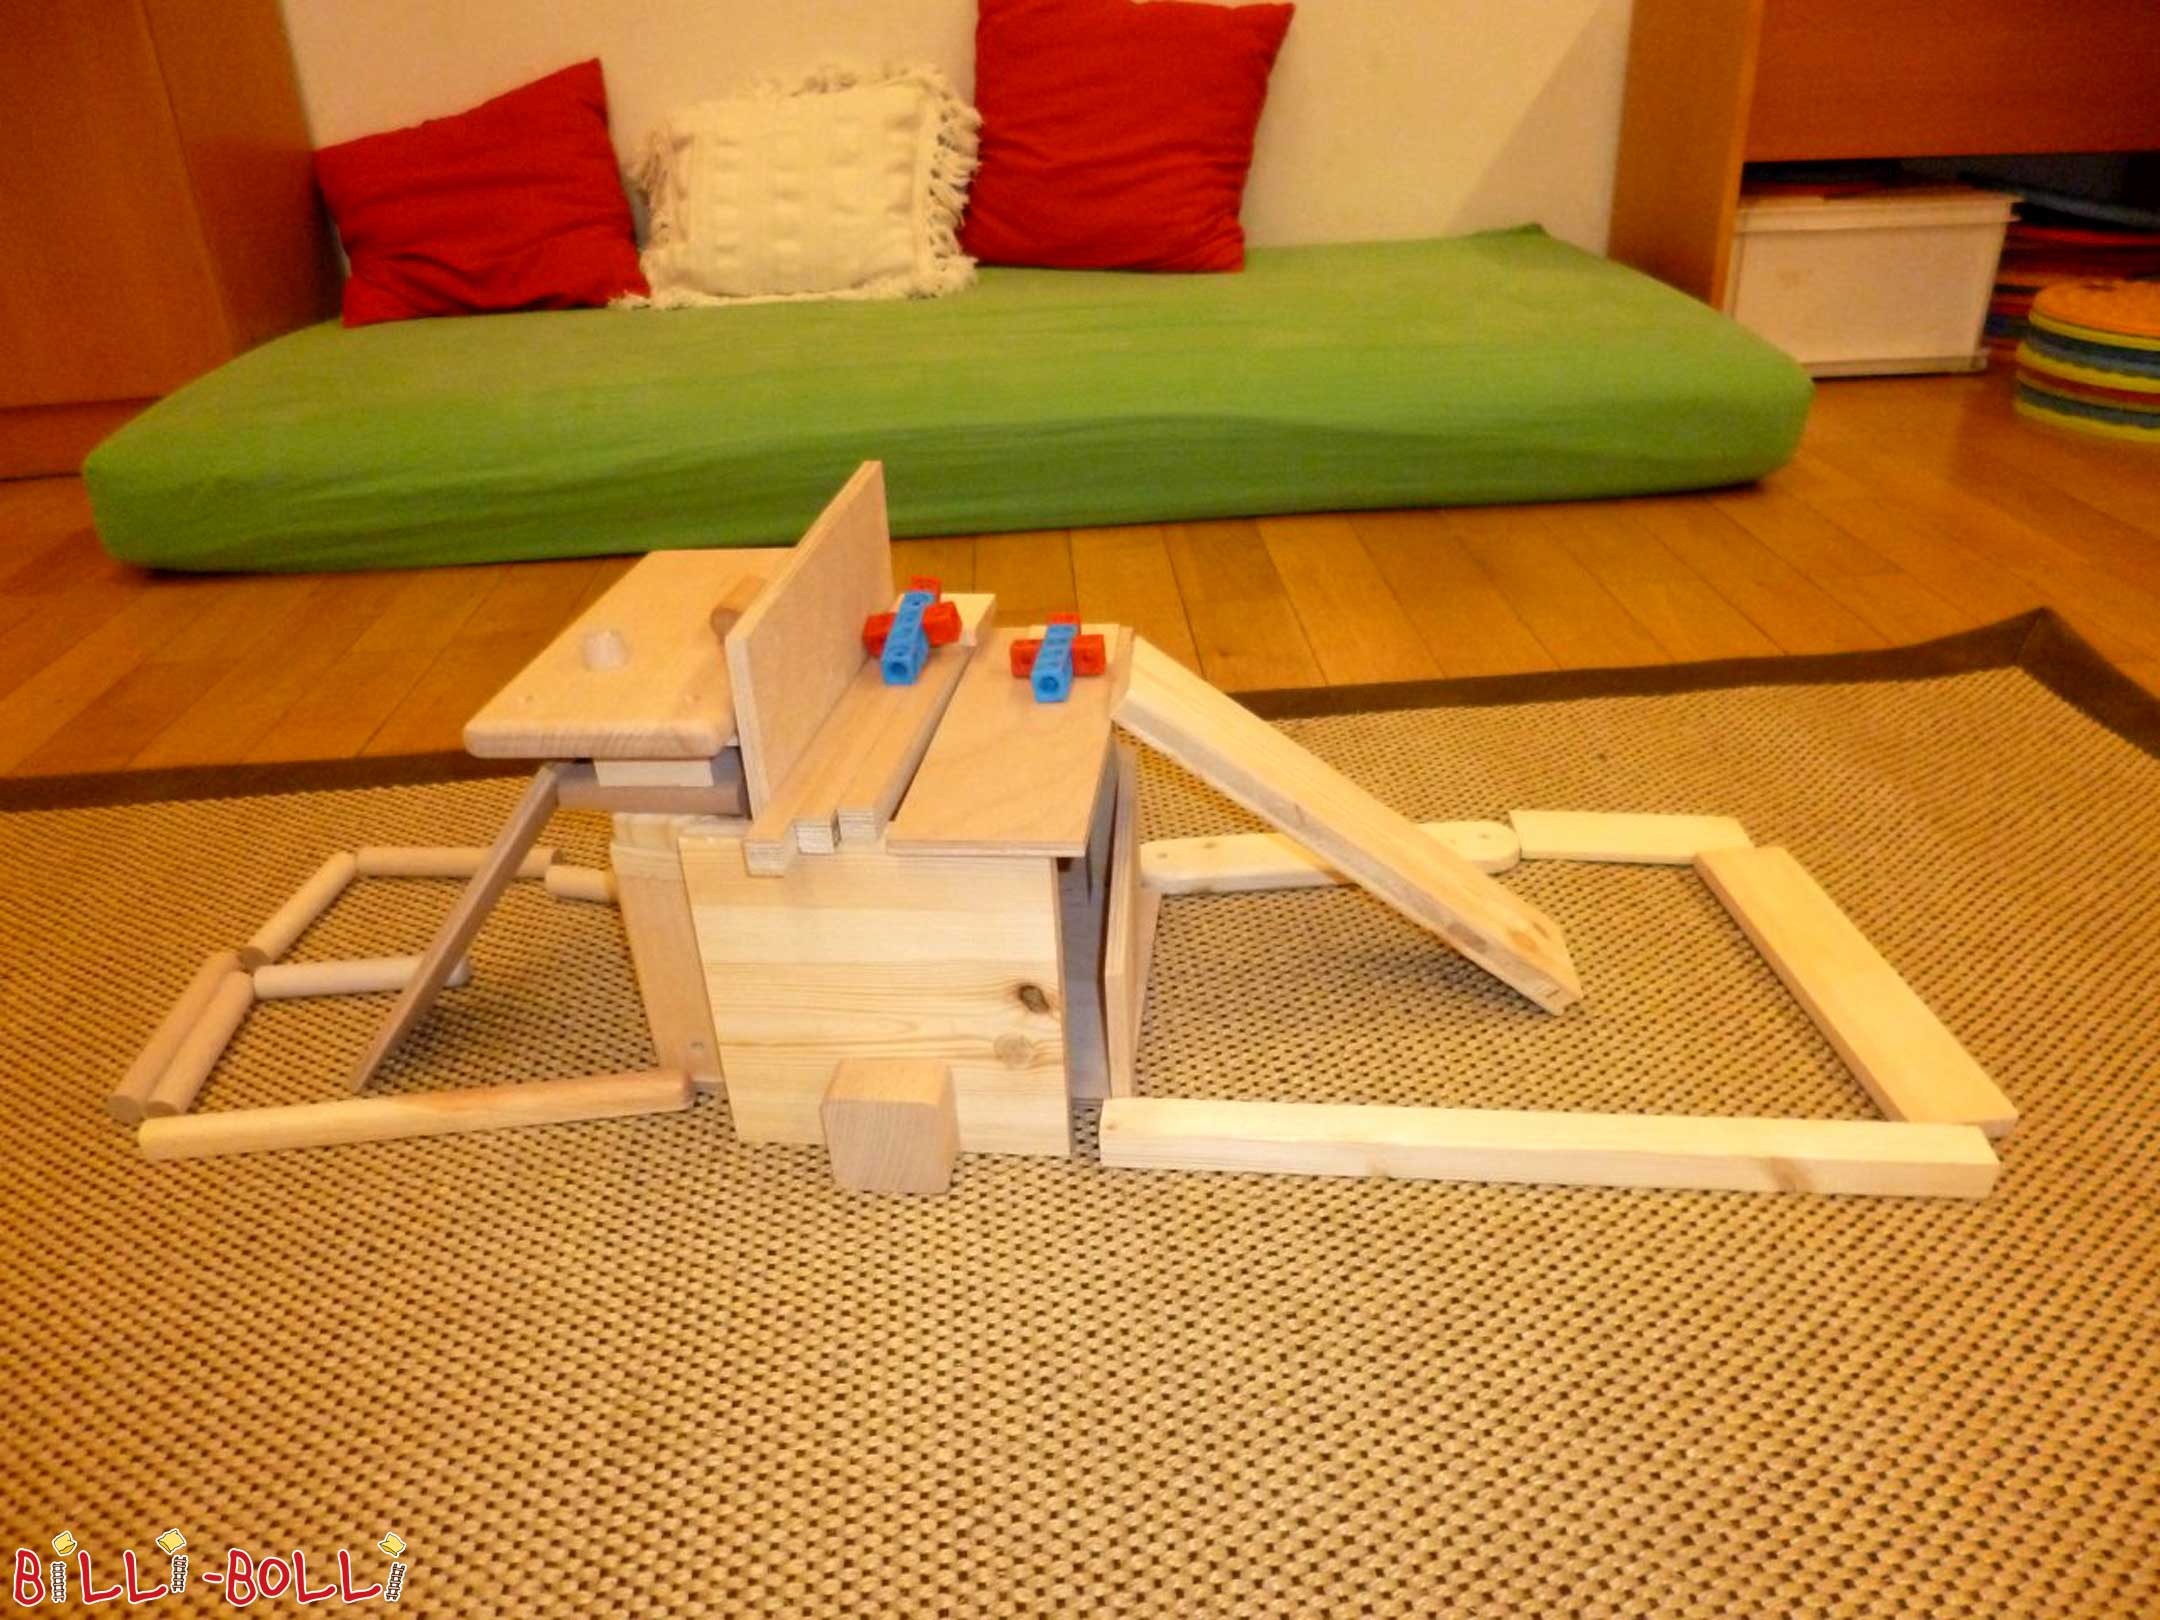 Dear Billi-Bolli! We would like to thank you very much for the craft wood and … (Free handicraft wood for kindergartens)